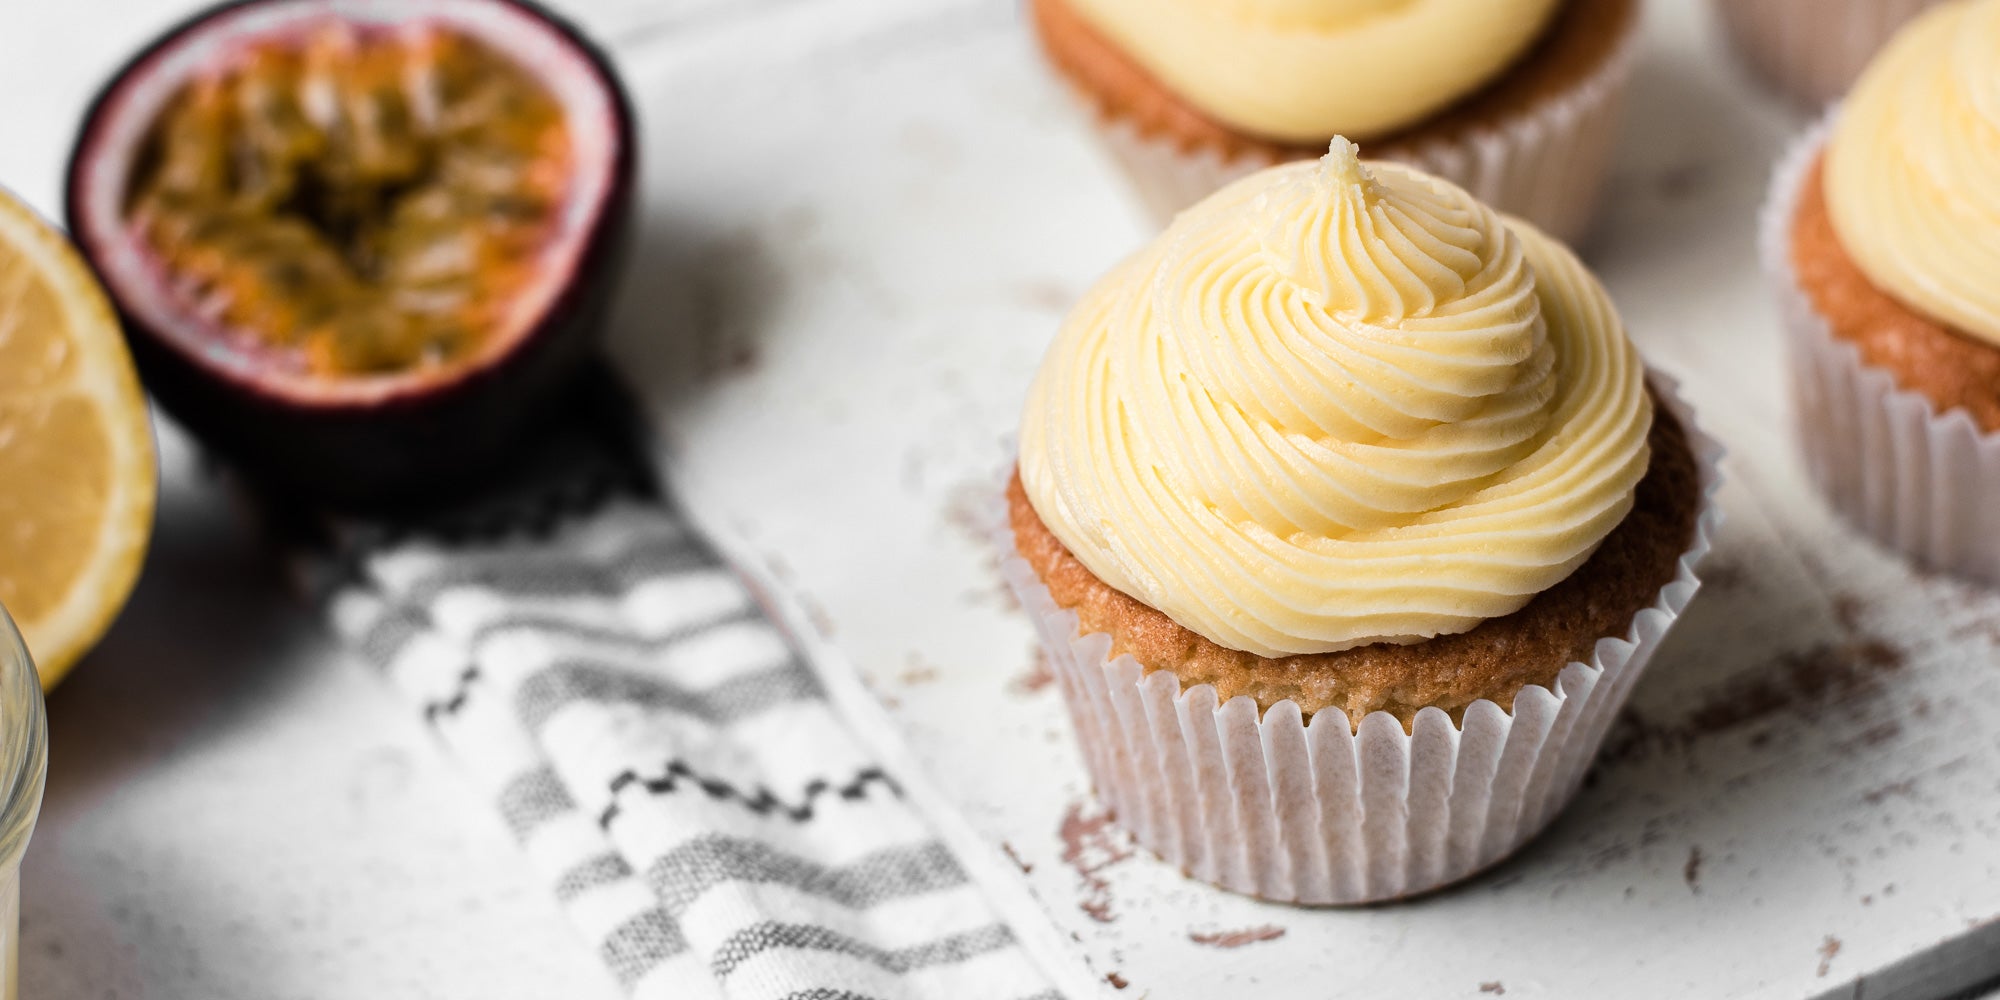 Cupcakes topped with passion fruit Icing next to a slice of passion fruit and lemon